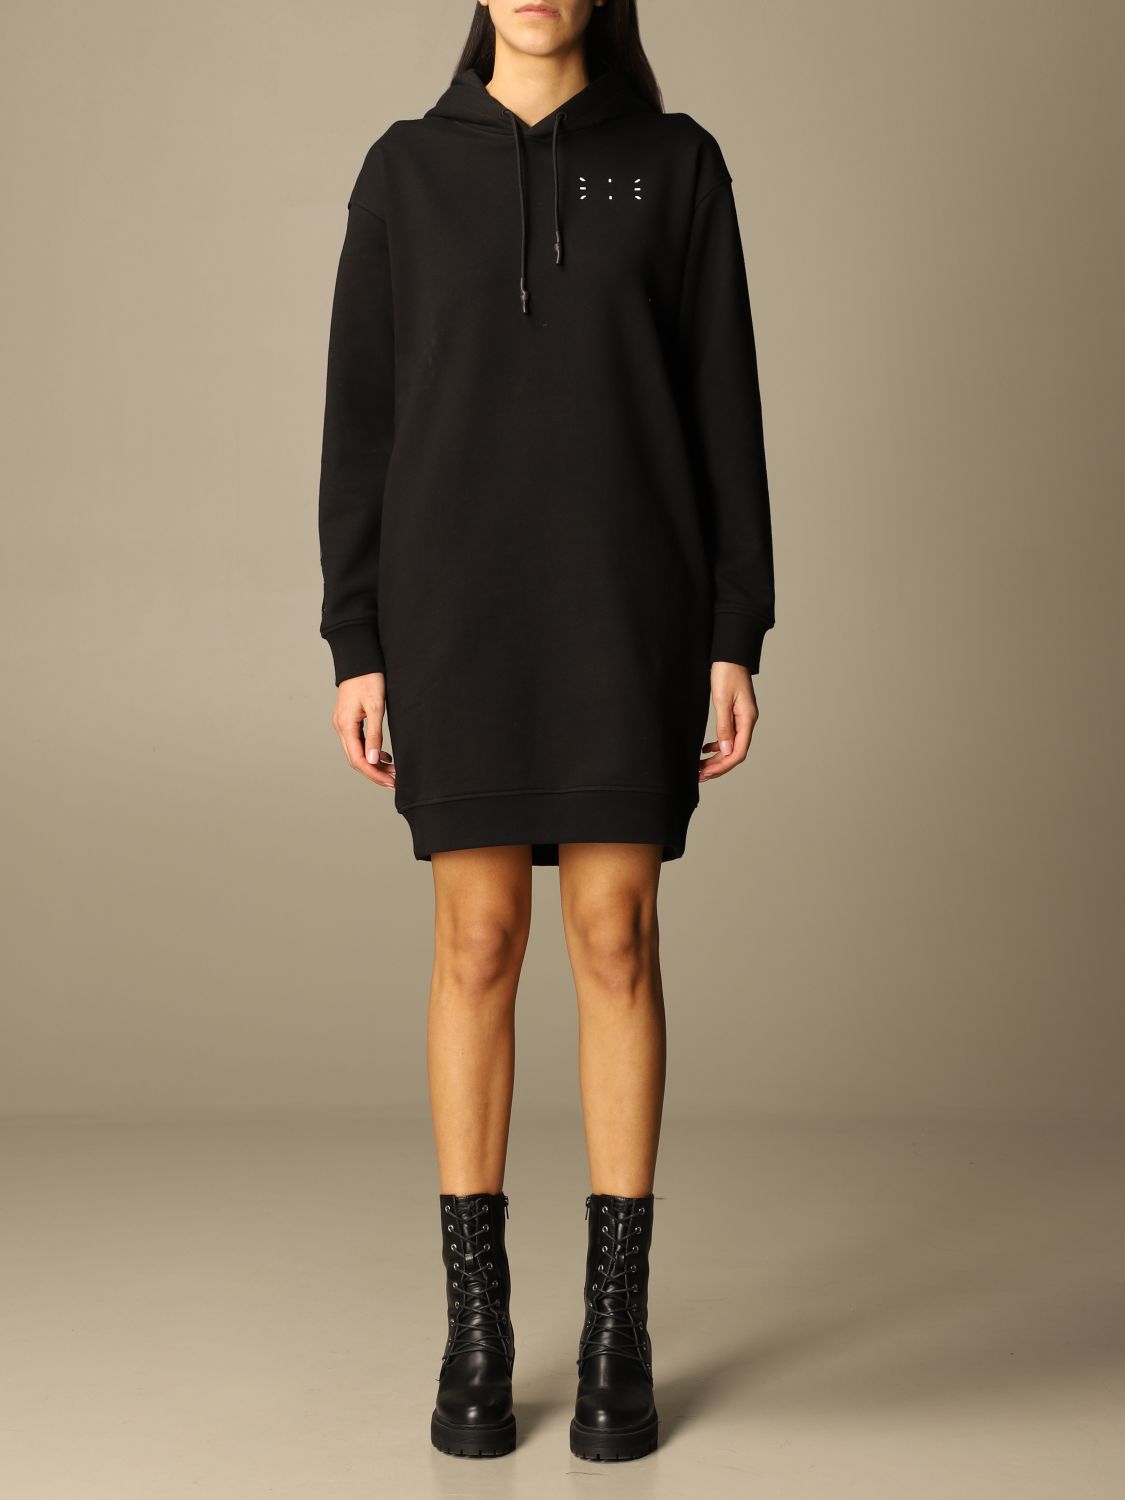 MCQ Ic-0 by McQ jumper dress in cotton with logo